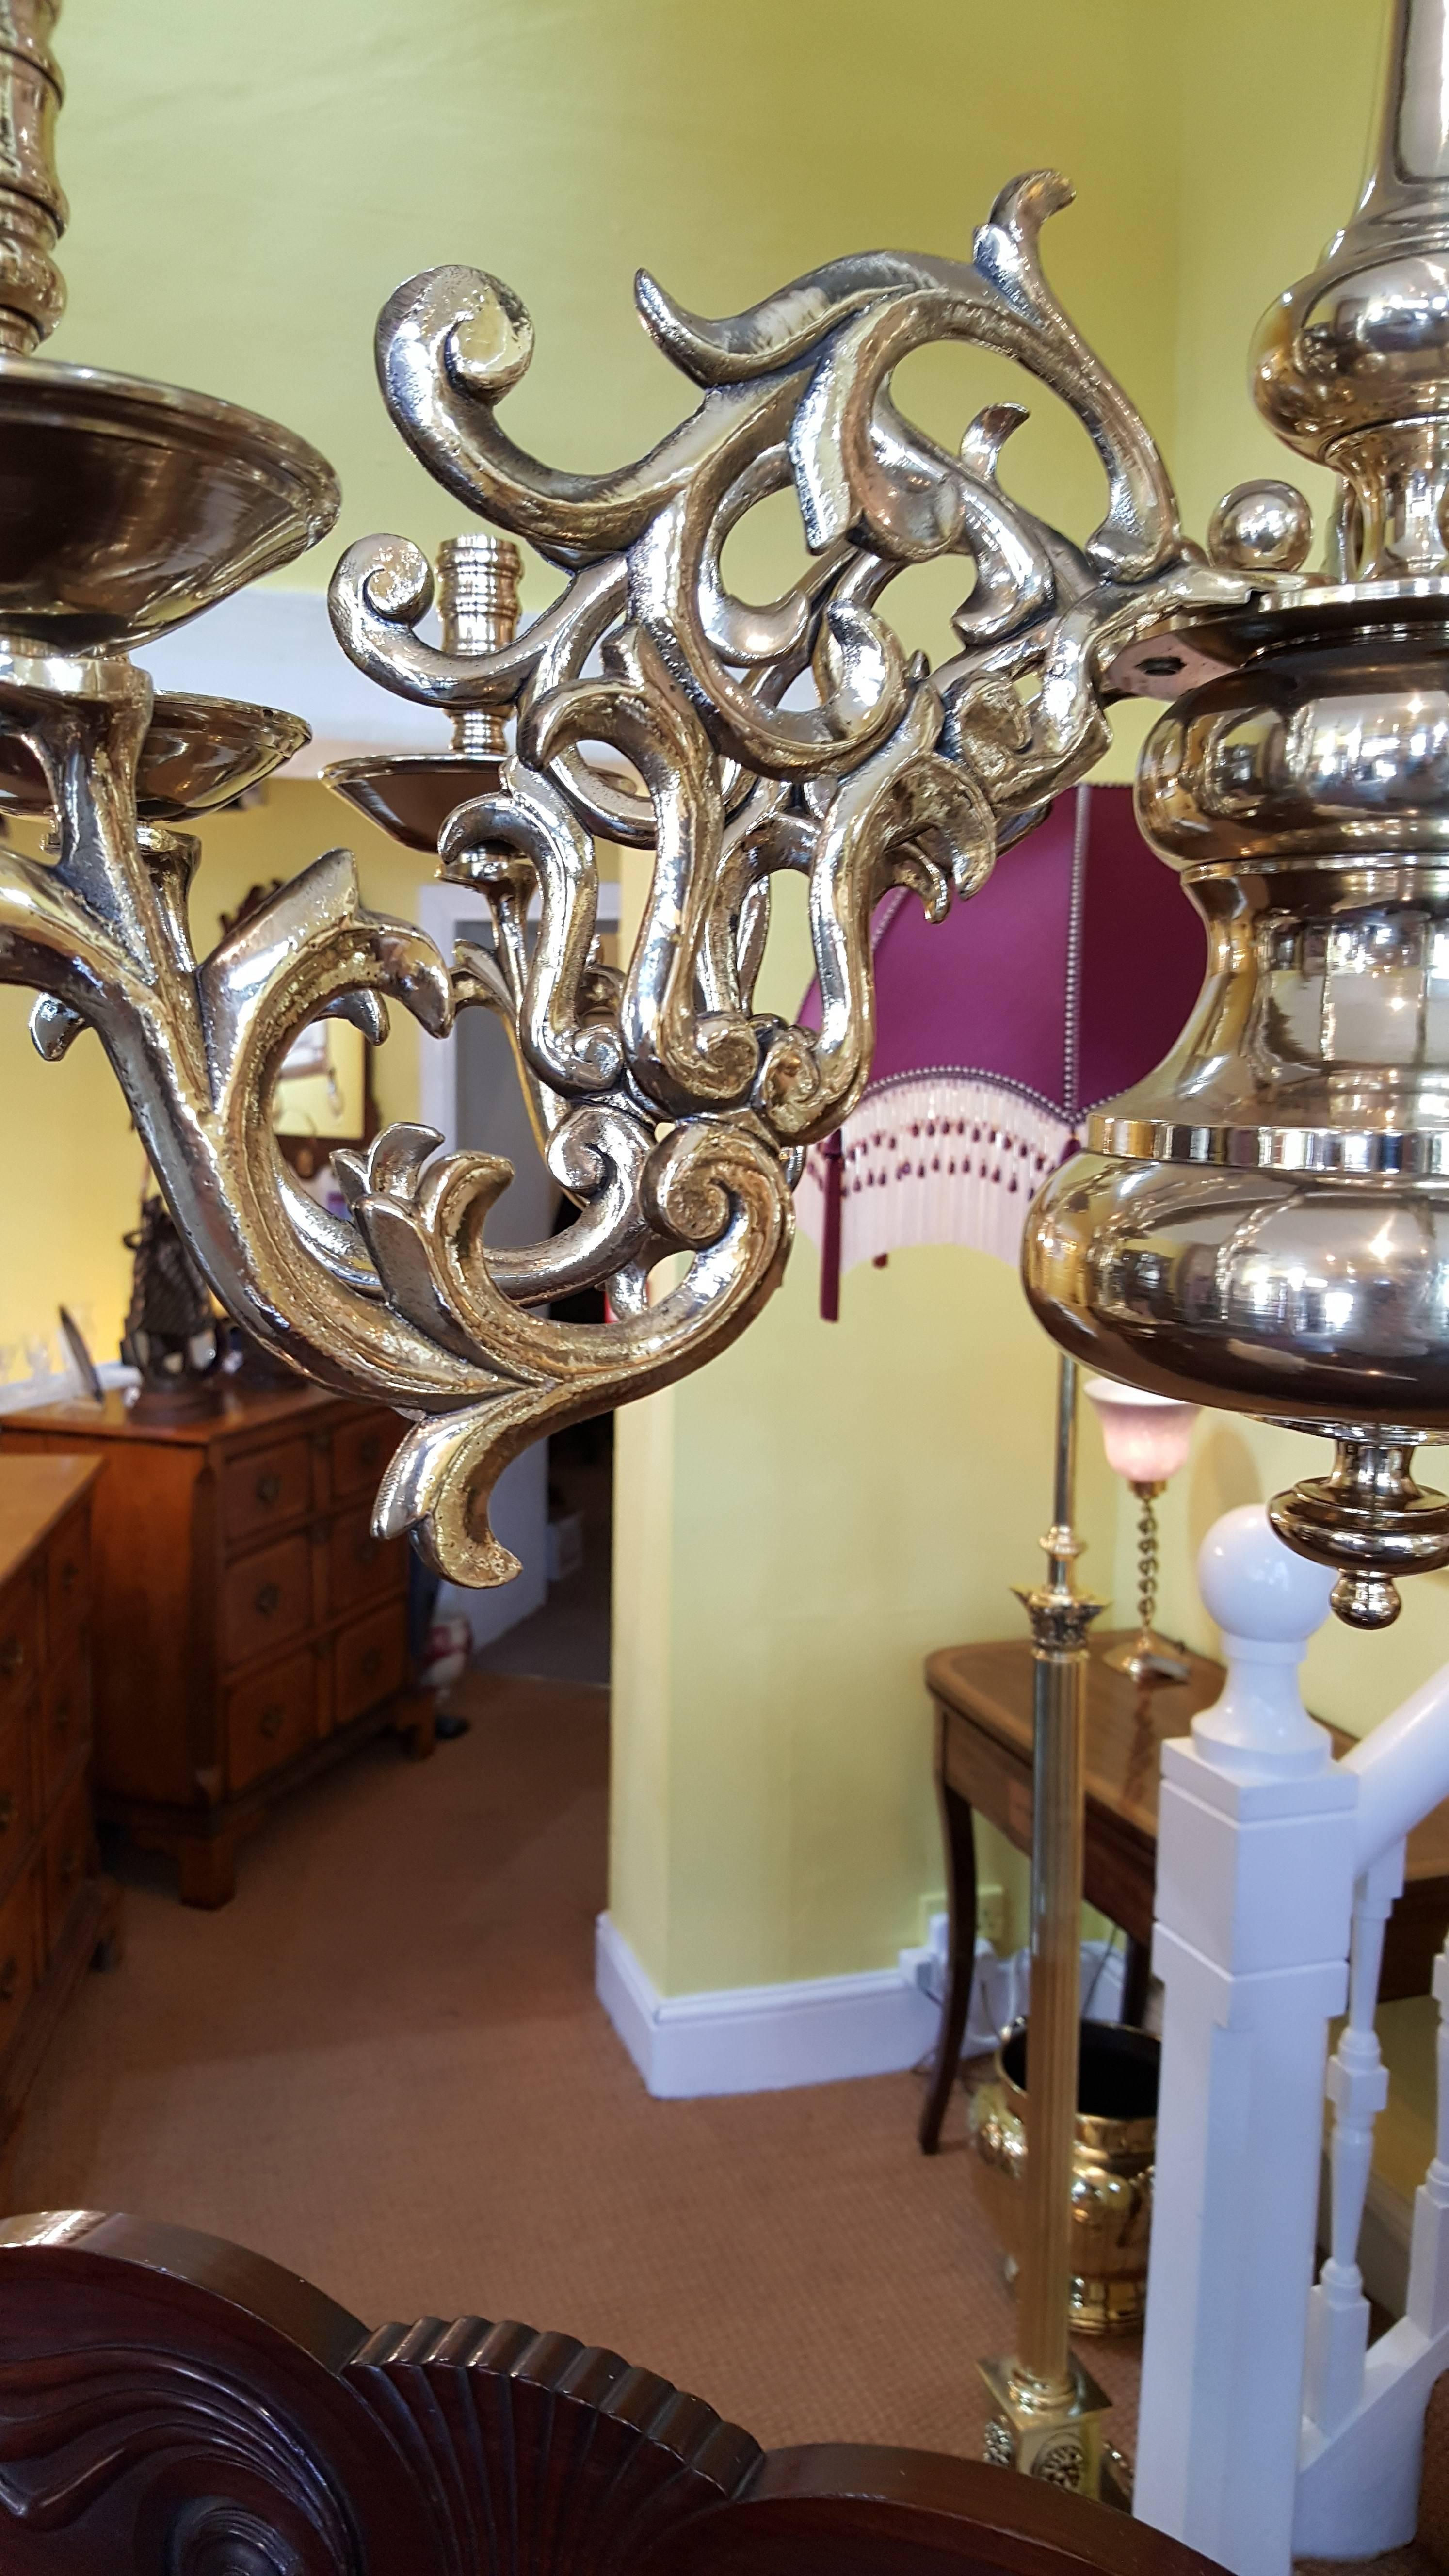 Mid-19th century substantial eight branch brass chandelier ceiling light with individual
candle holders with drip trays 
Measures: 26